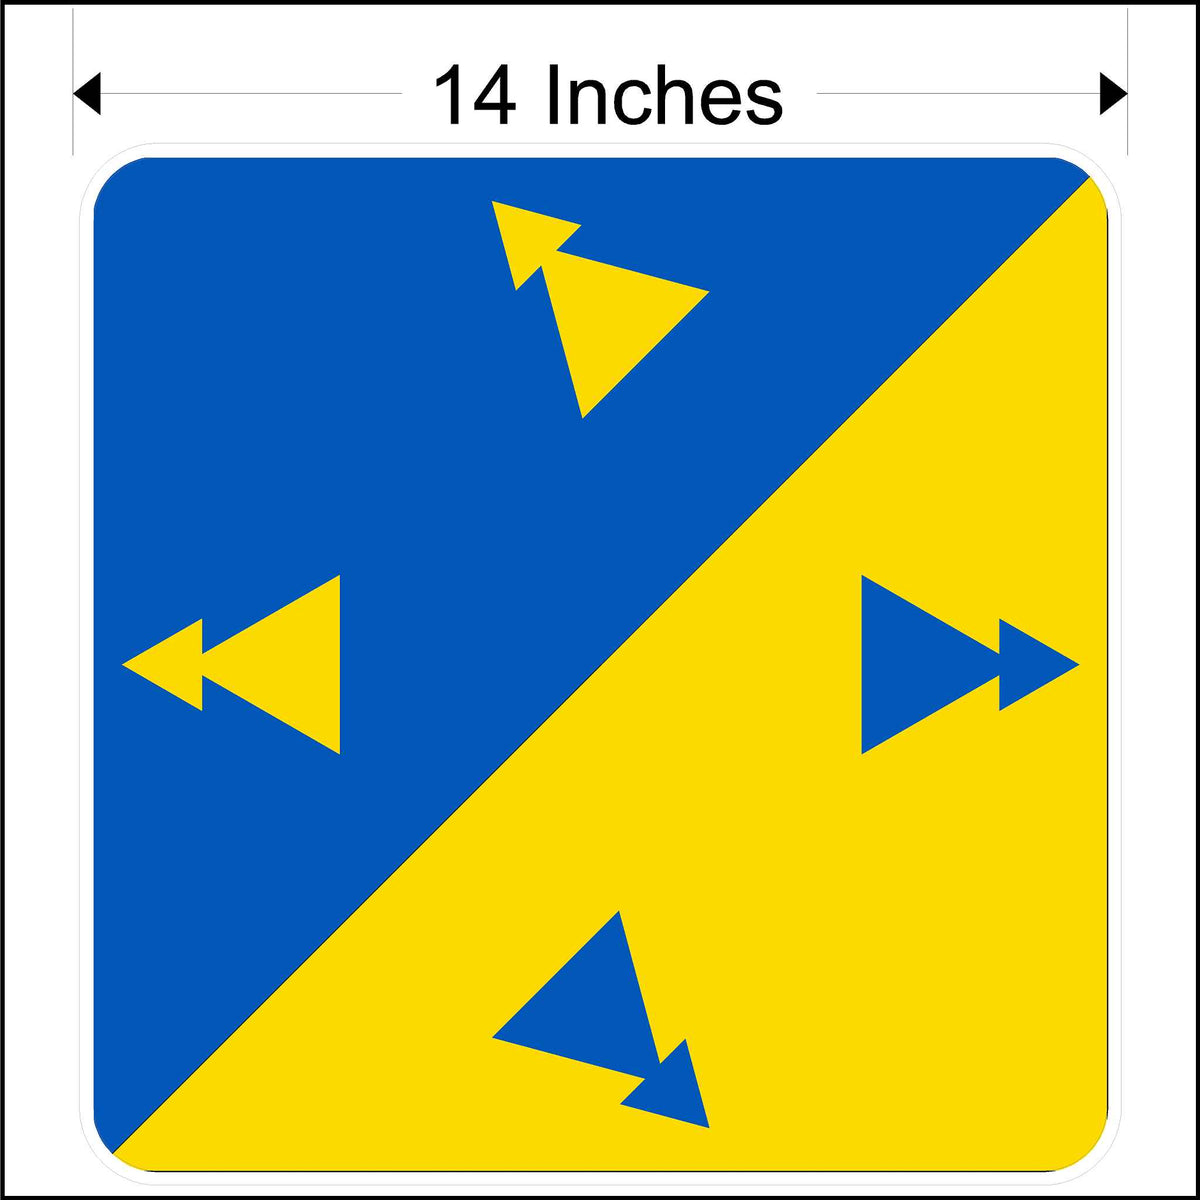 Fourteen inch square directional decal printed in blue and yellow with triangle arrows pointing direction.